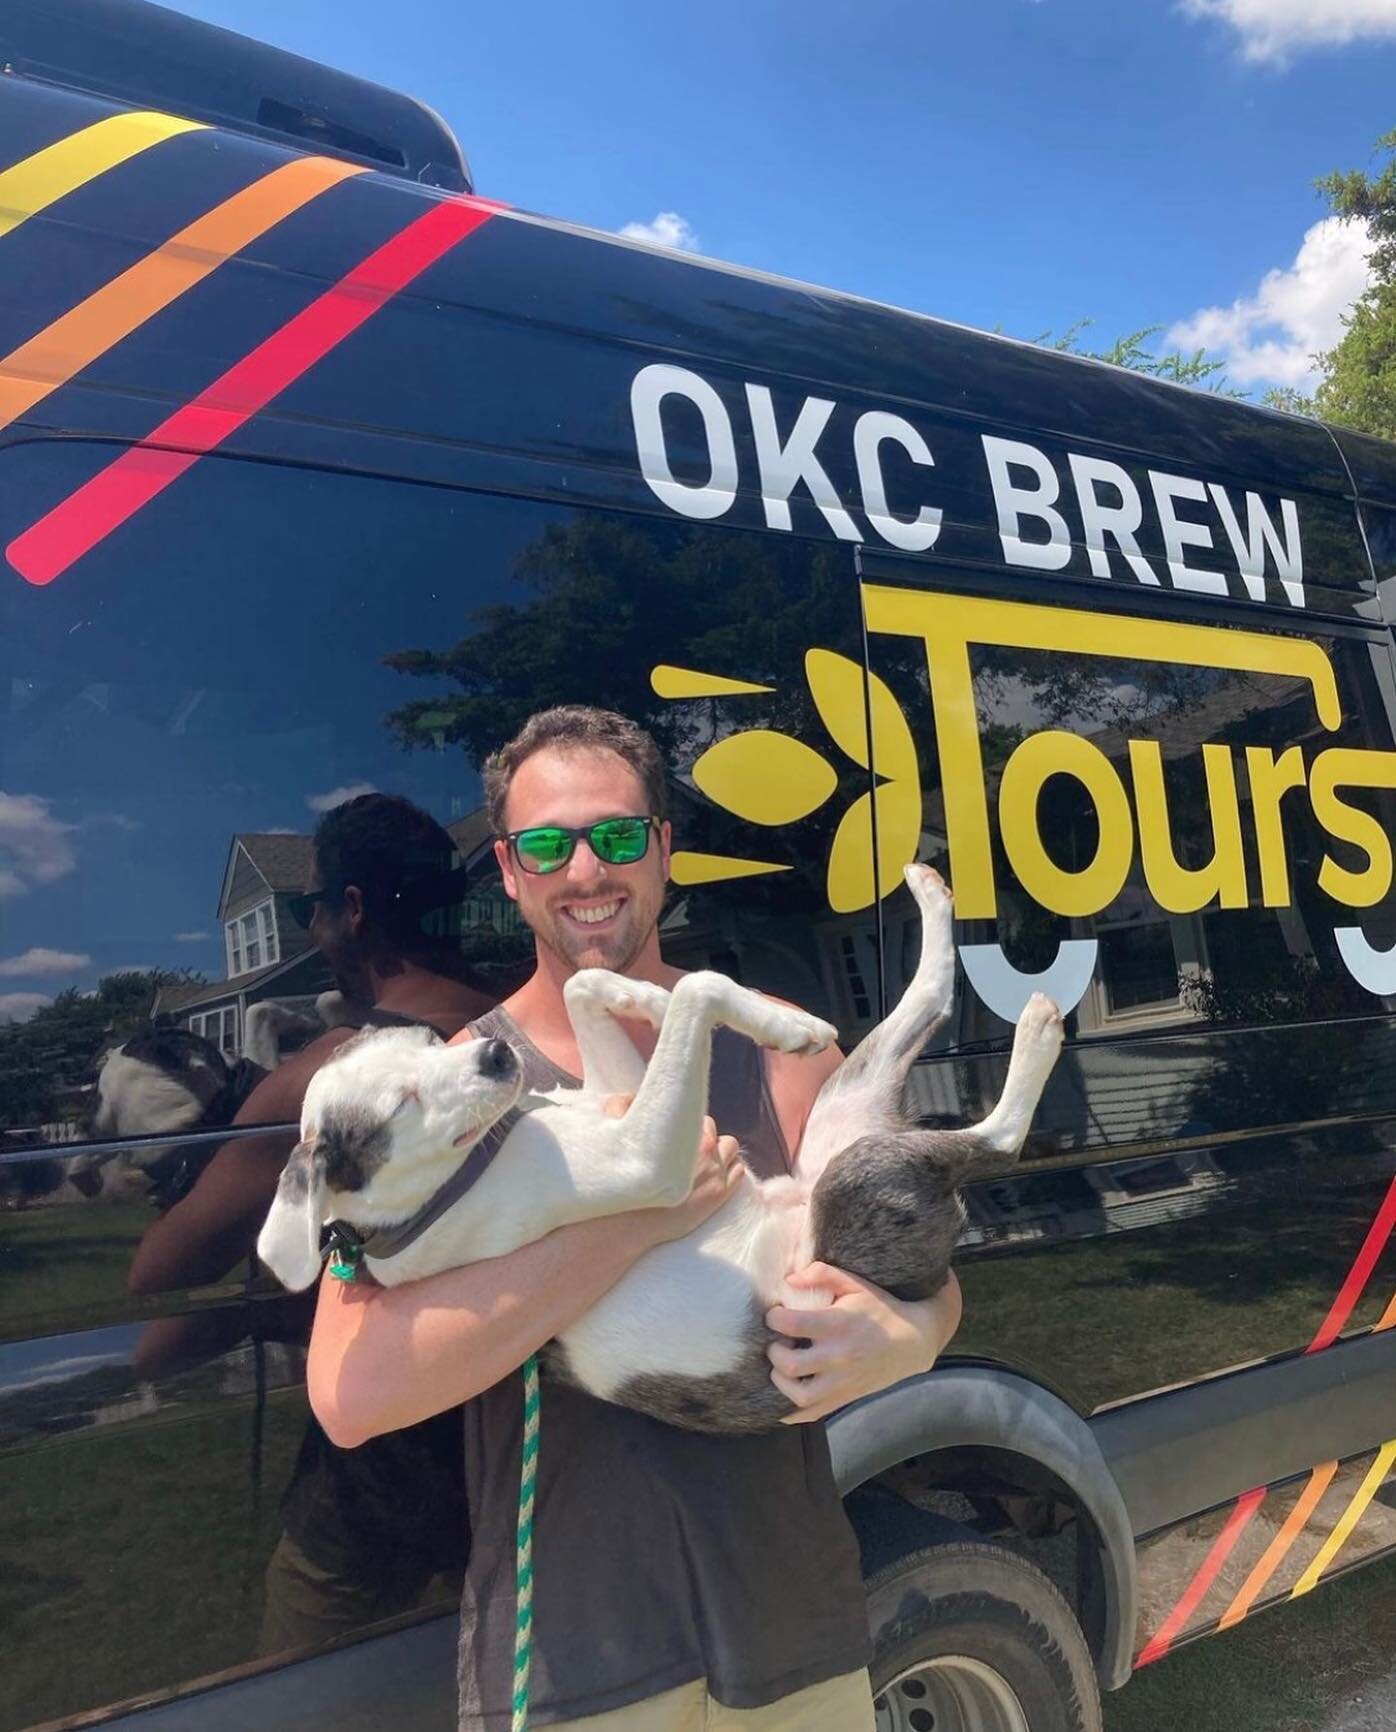 Hey Friends, 

Please read this update about our good friend Lloyd Vines, who has been part of our staff since we opened in 2020. He also is a big part of the OKC Brewing community with his @okcbrewtours business. 

&mdash;

From his page:

&ldquo;As